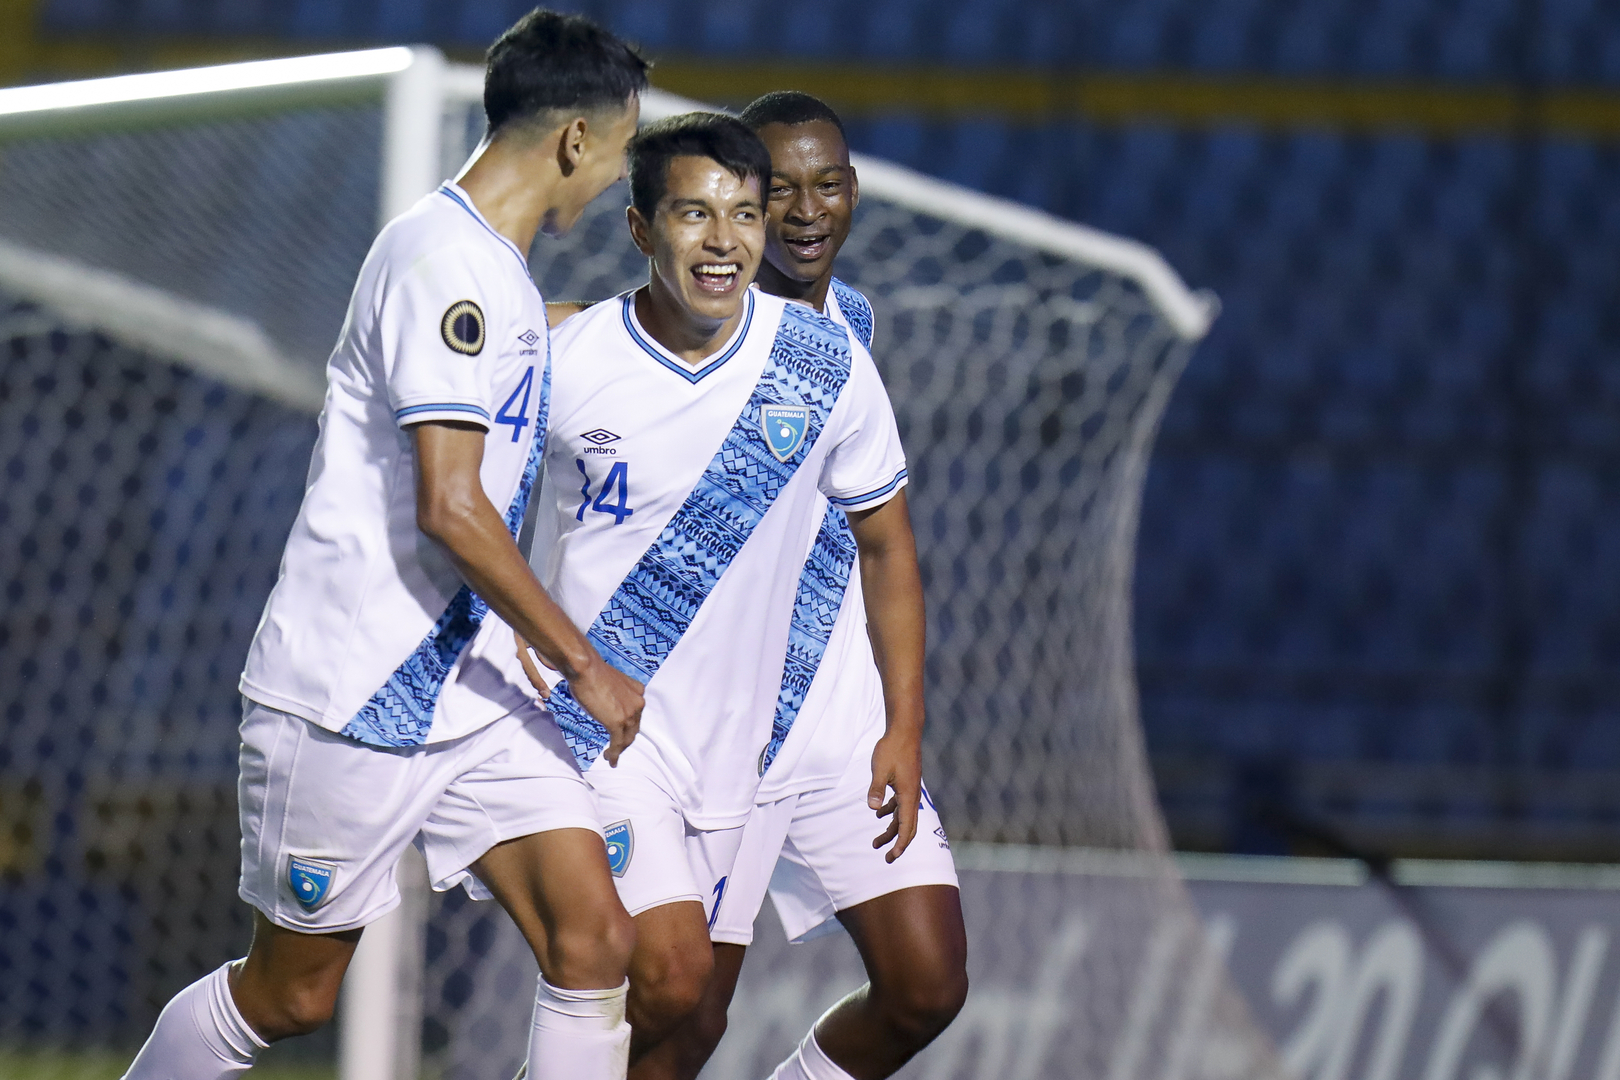 GUATEMALA CITY, GUATEMALA. FEBRUARY 29th: Guatemala players celebrating after scoring during the Group C match between Guatemala and Aruba in the Concacaf Under-20 Championship, held at the Doroteo Guamuch Flores stadium, in Guatemala City, Guatemala.

(PHOTO BY NORVIN MENDOZA/STRAFFON IMAGES/MANDATORY CREDIT/EDITORIAL USE/NOT FOR SALE/NOT ARCHIVE)